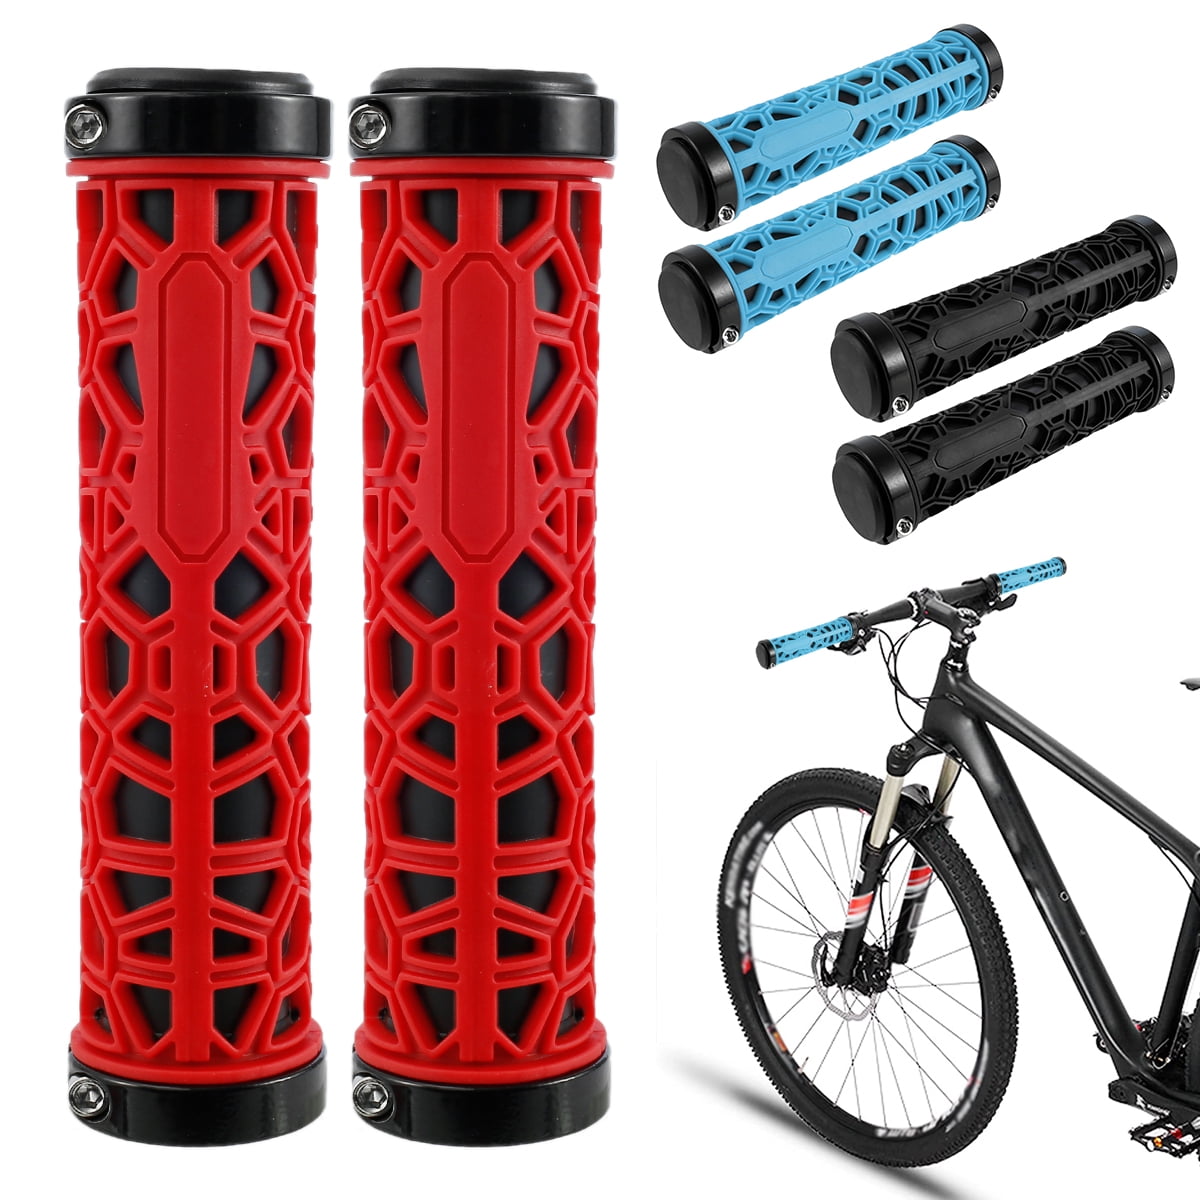 MTB Mountain Bike Grips Bicycle Cycling Double Lock on Handle Bar Rubber Grips 